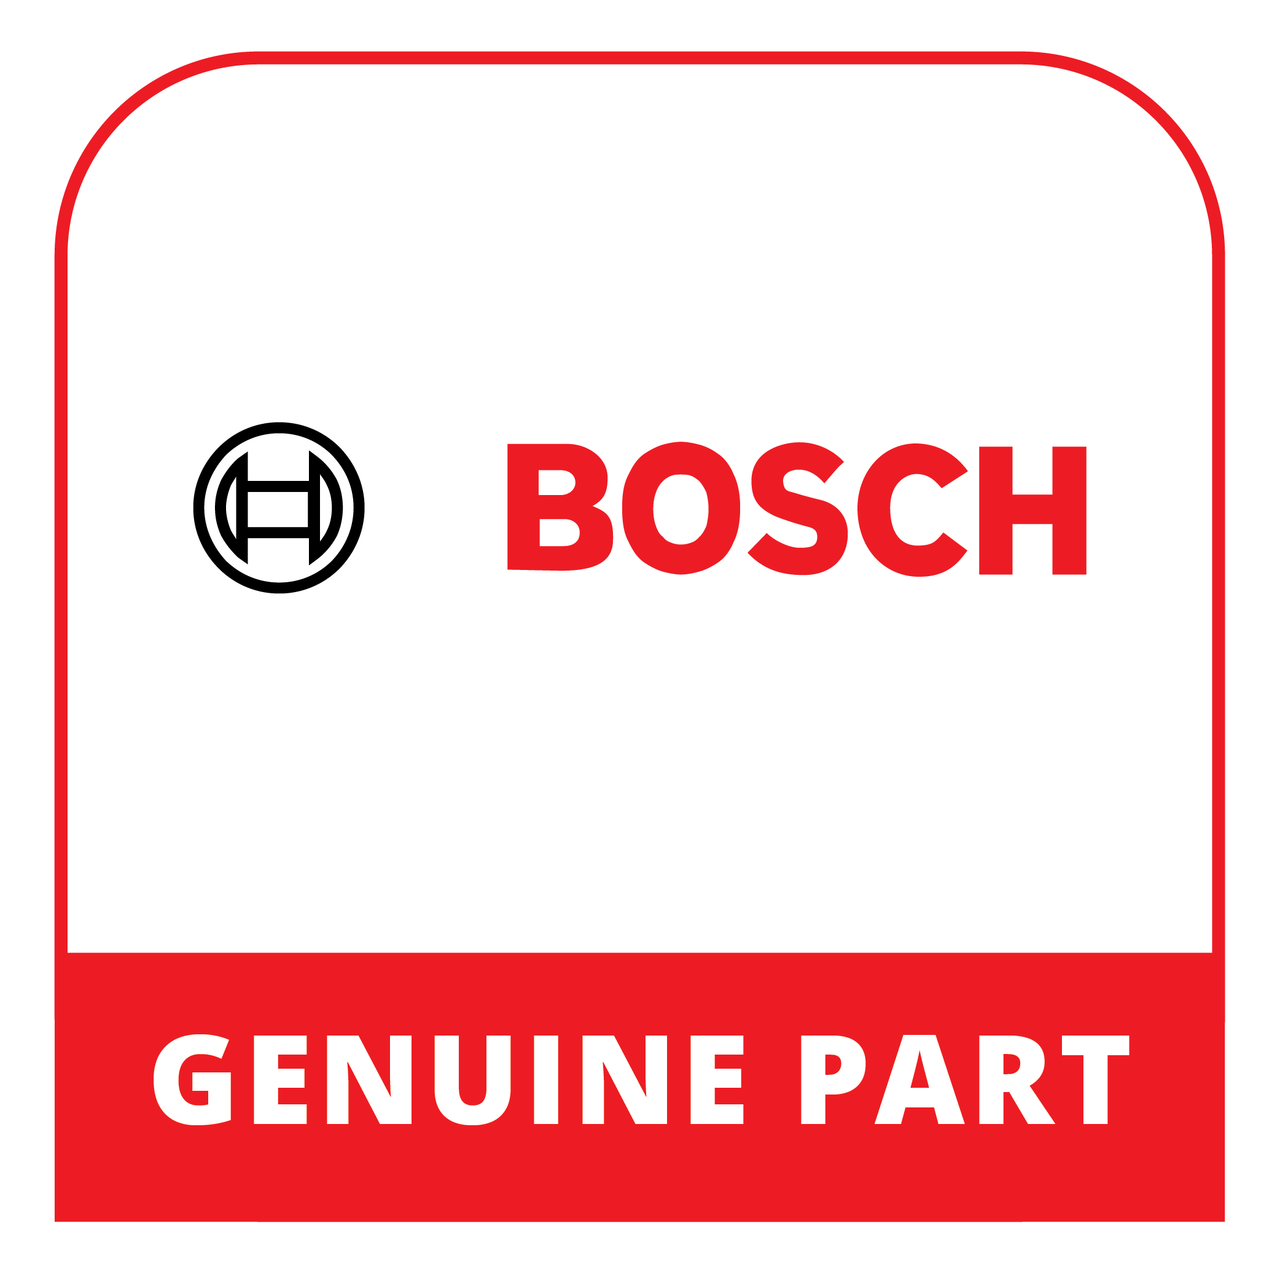 Bosch (Thermador) 10009386 - Tube - Genuine Bosch (Thermador) Part